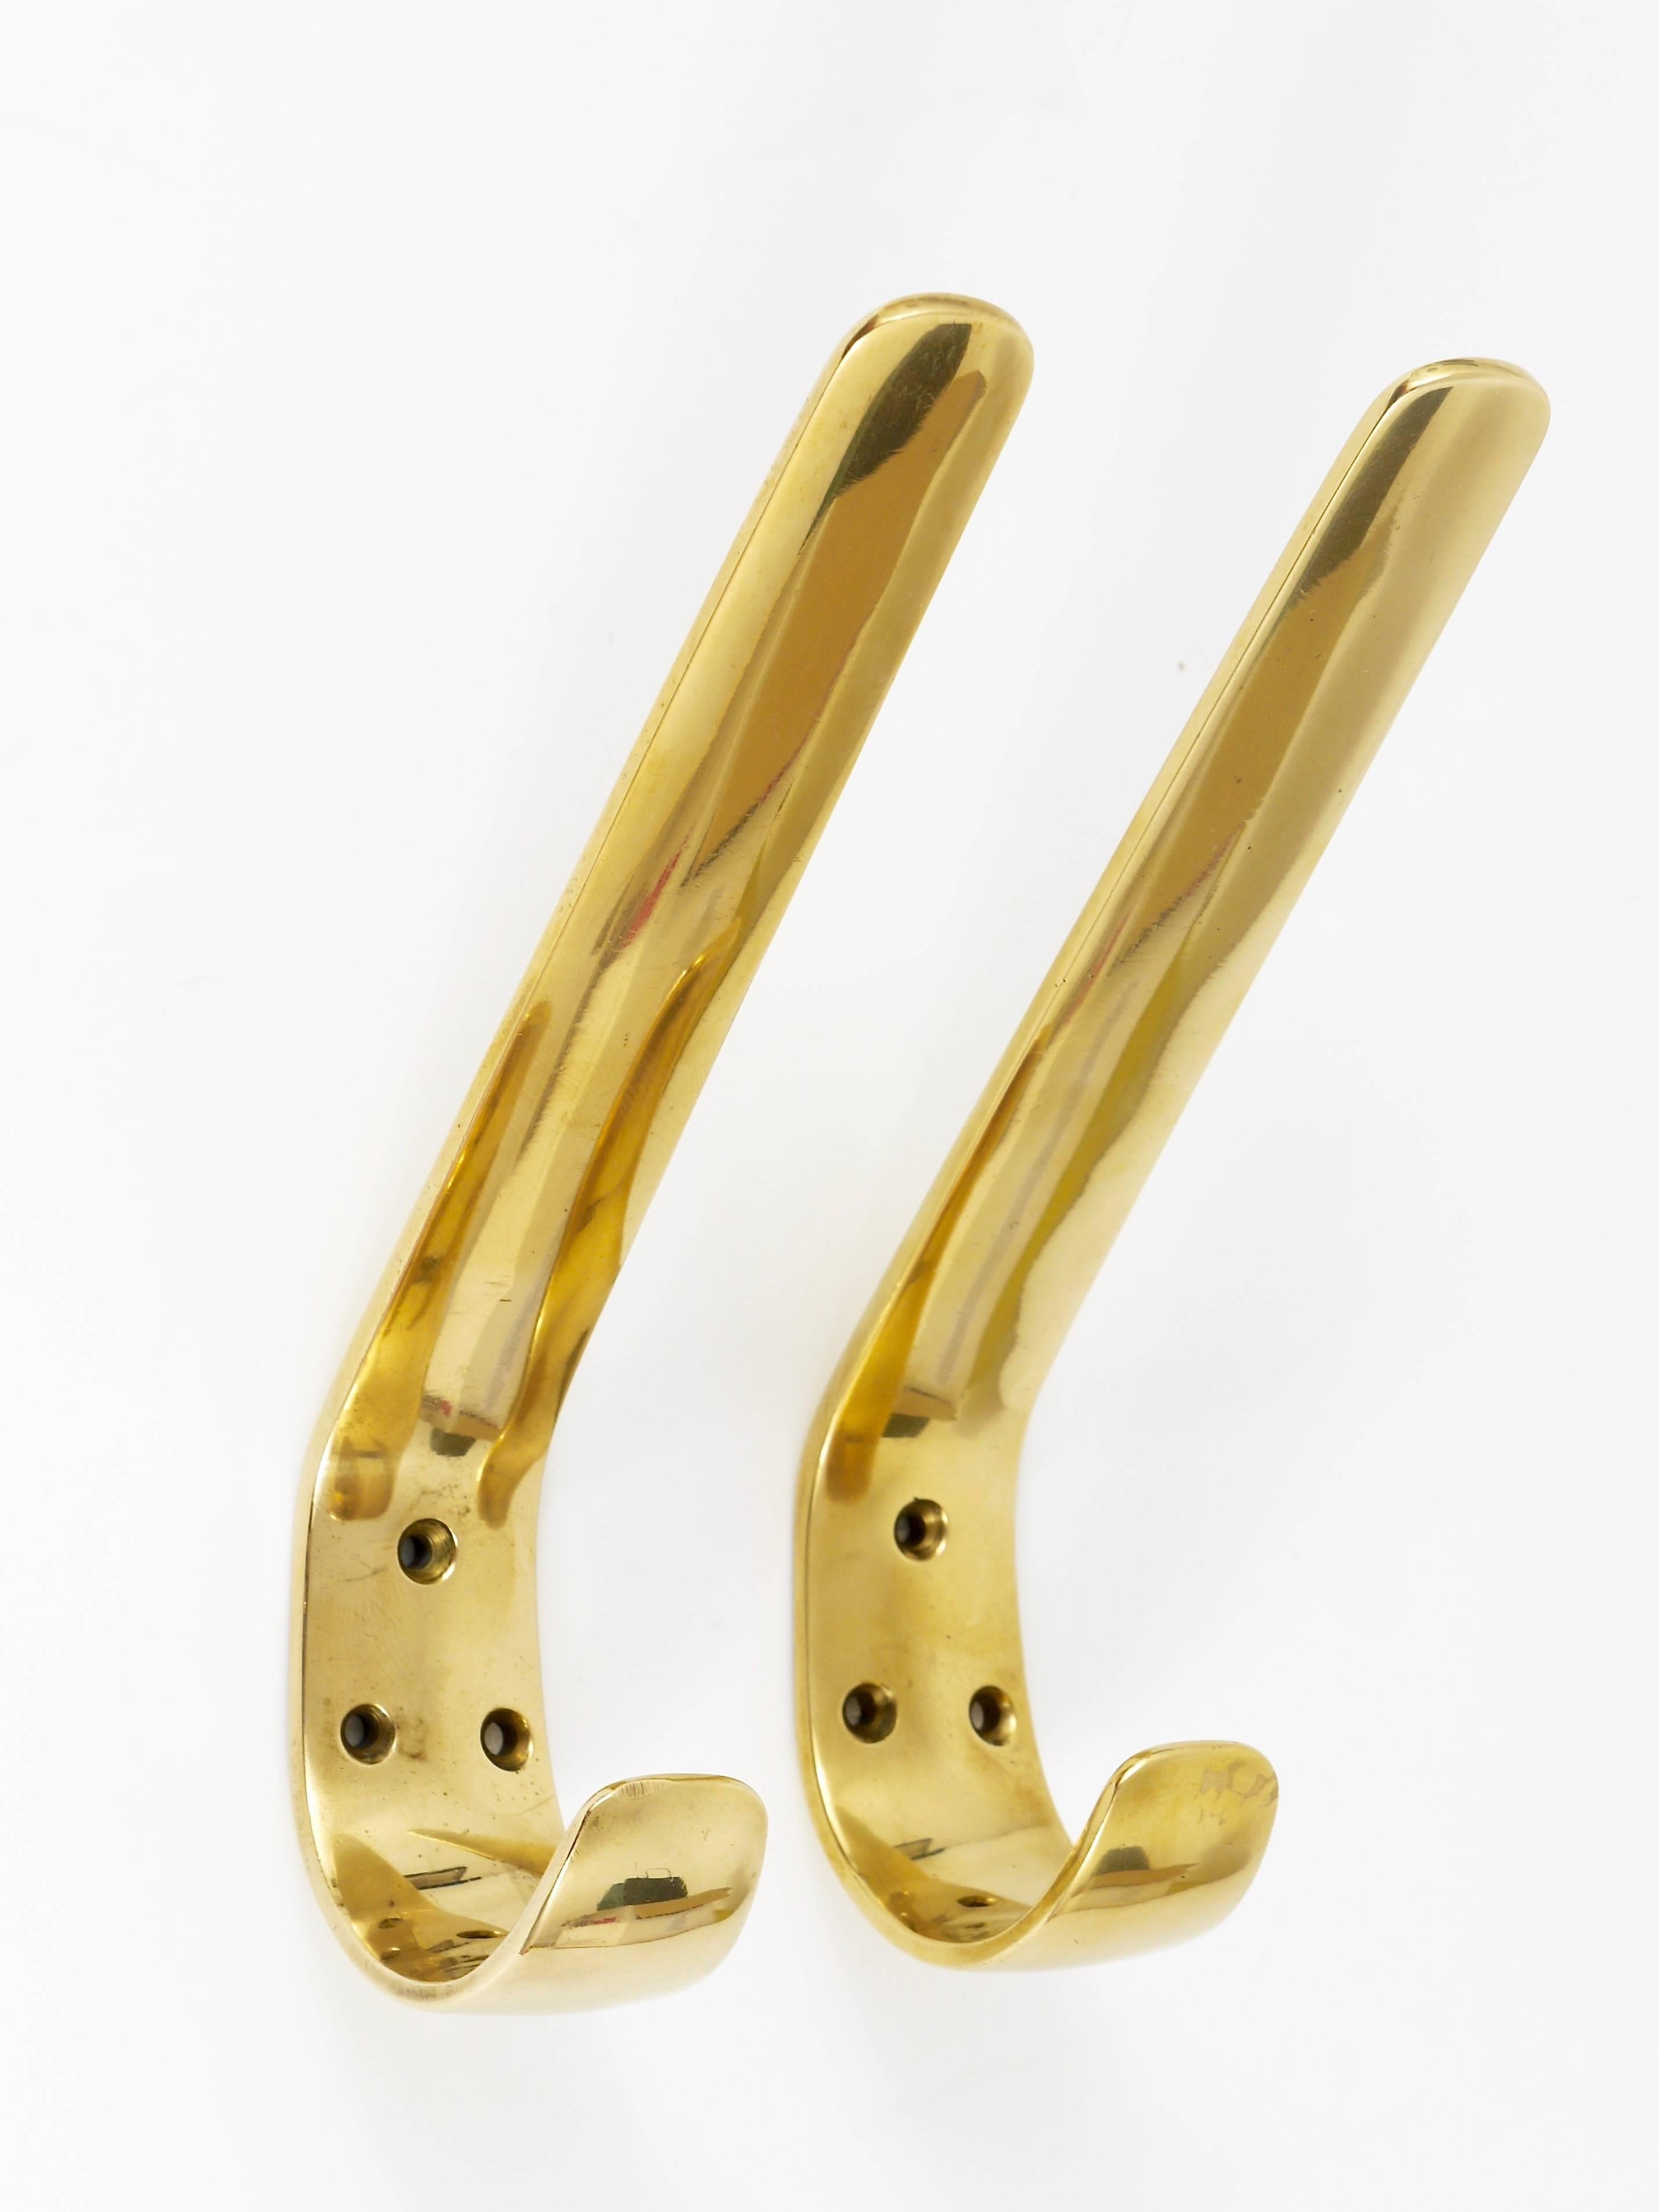 A pair of beautiful Austrian modernist brass wall hooks, very solid, executed in the 1950s by Hertha Baller, Austria. Gently polished by hand in very good condition with nice patina.